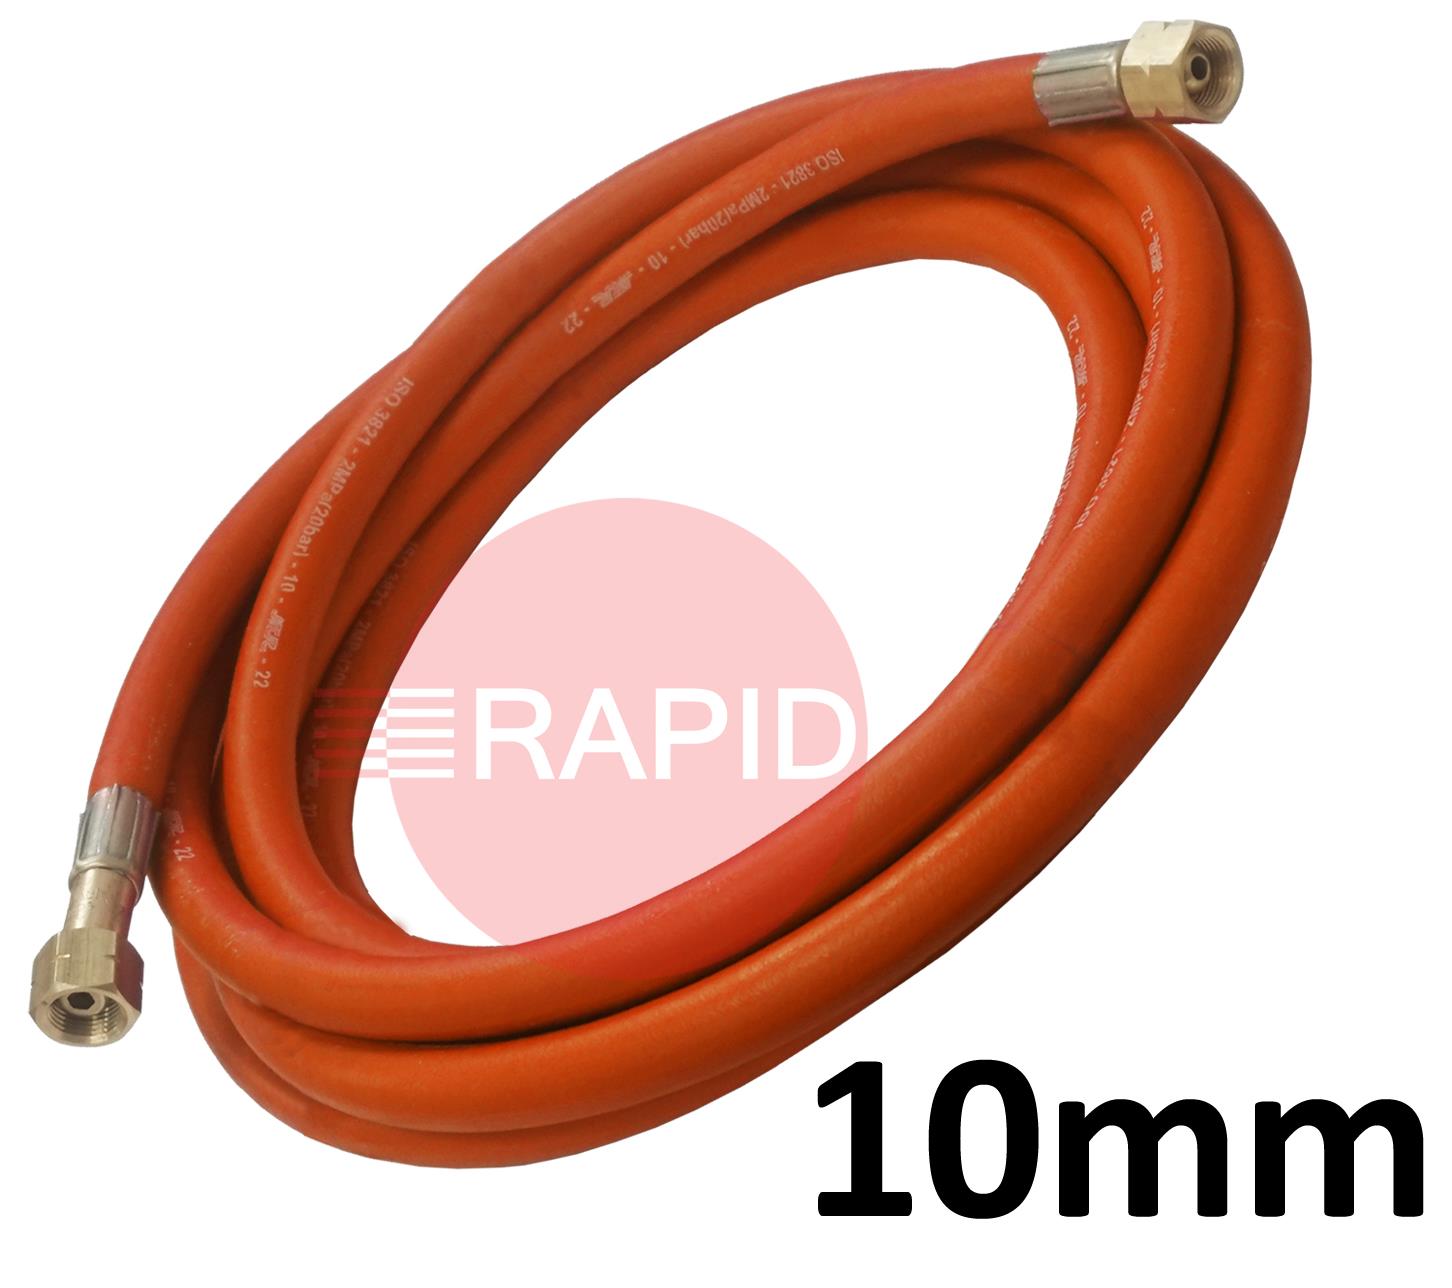 PROHOSE10MM  Fitted Propane Hose. 10mm Bore. G3/8 Check Valve & G3/8 Regulator Connection